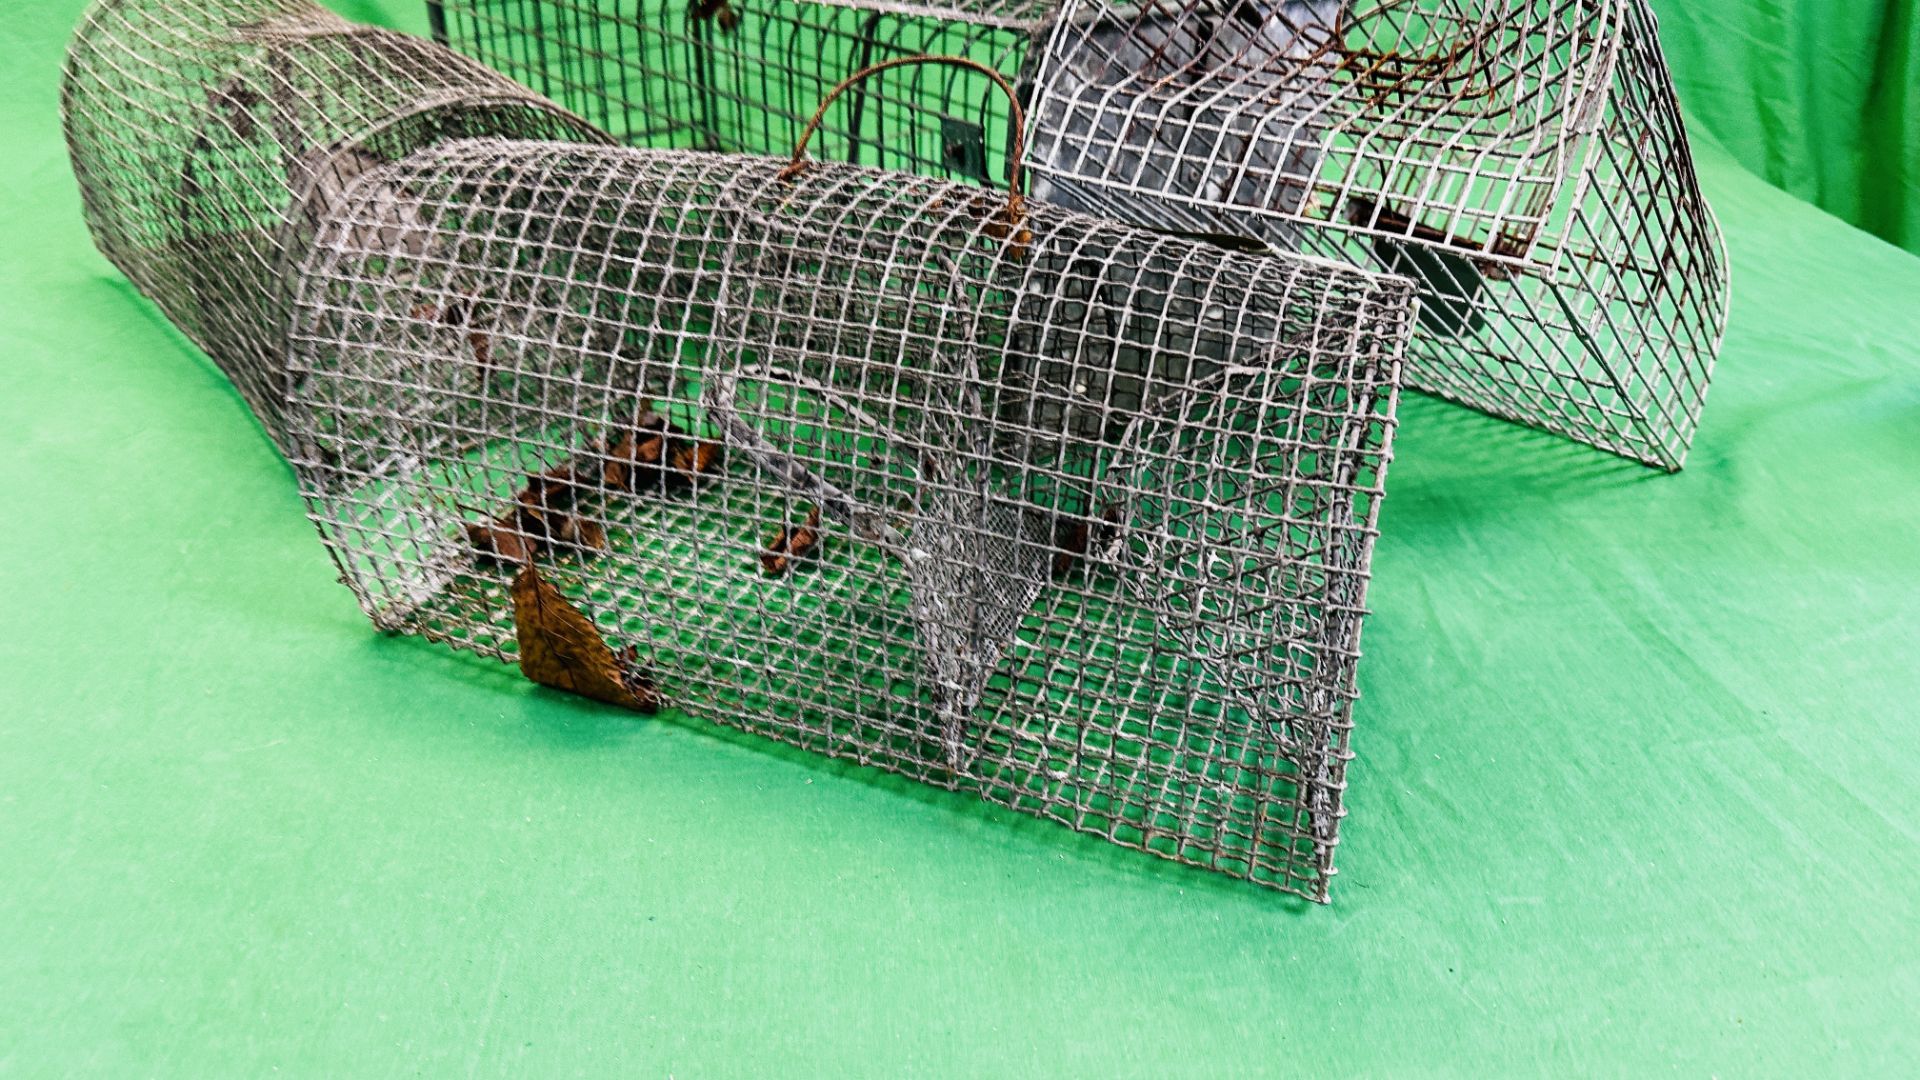 A GROUP OF FIVE HUMANE TRAPS - Image 2 of 8